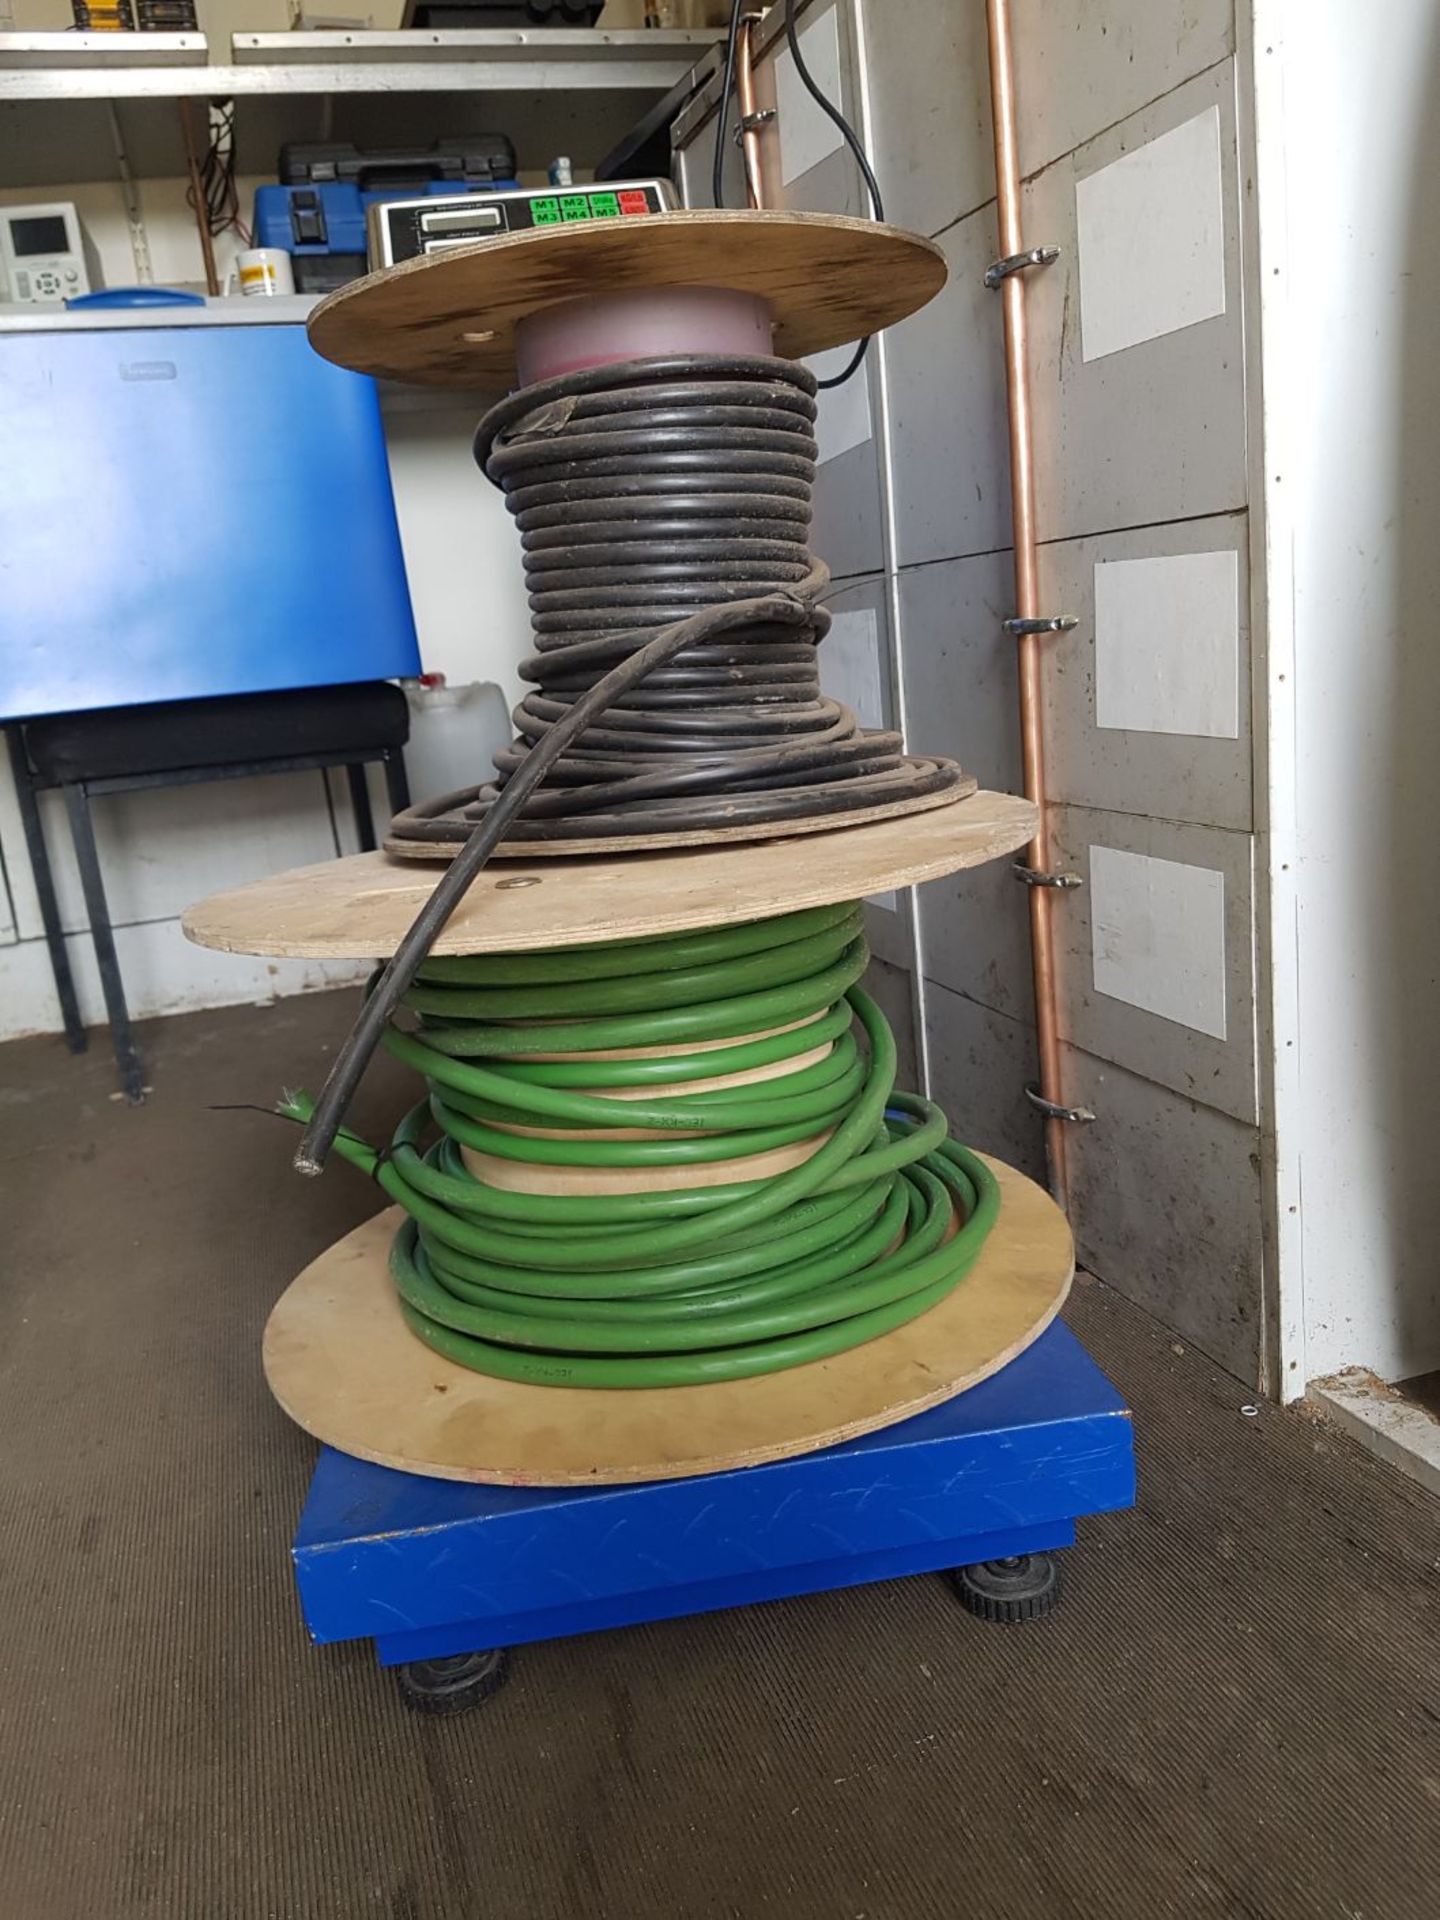 Approximately 29kg of copper electrical cable on reels